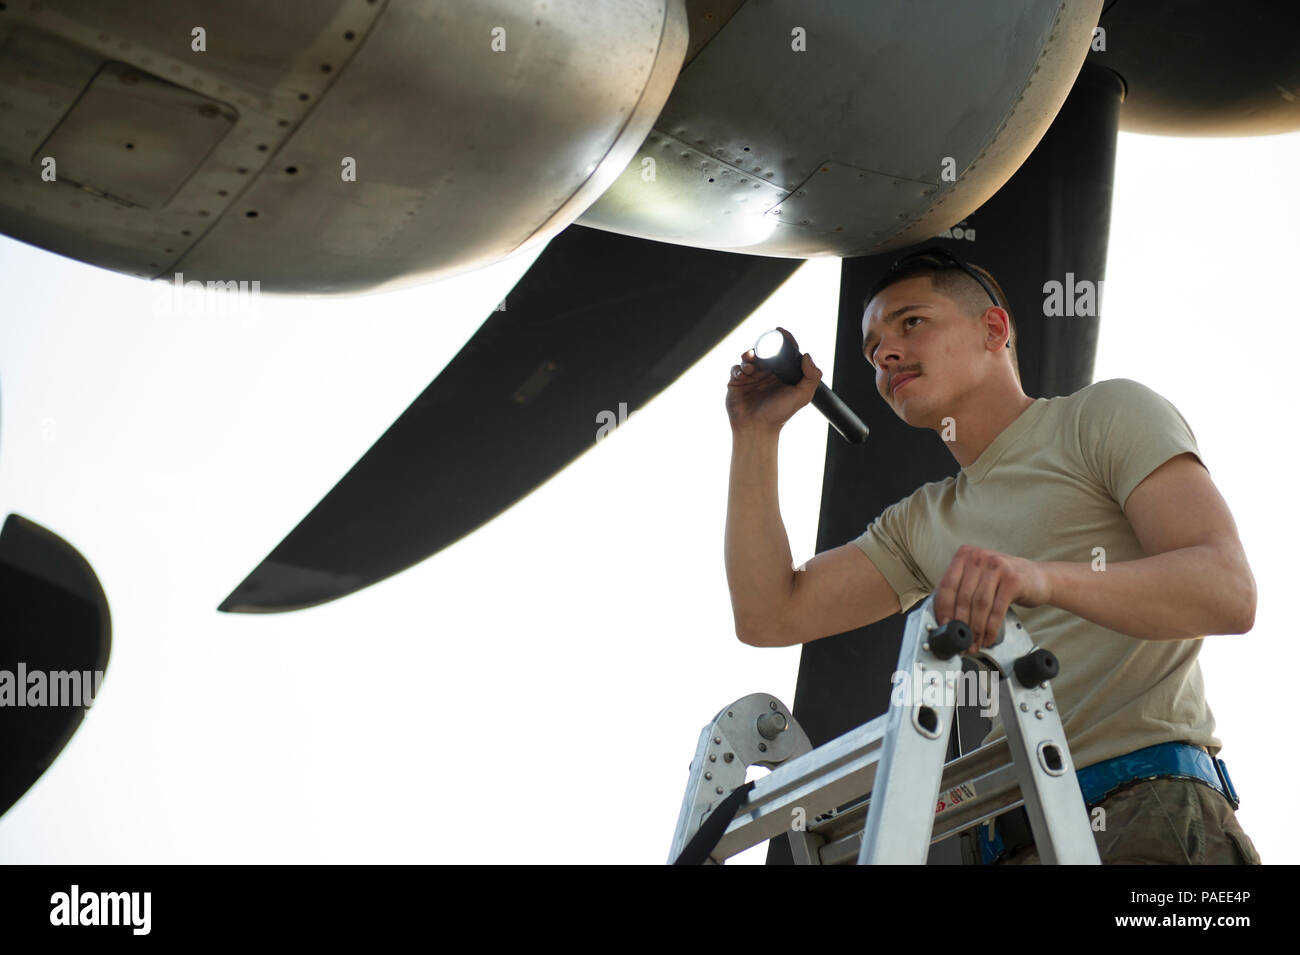 Senior Airman Alec Flores, 455th Expeditionary Aircraft Maintenance Squadron crew chief, visually inspects the intake of C-130J Super Hercules during a basic post flight and preflight combo inspection at Bagram Airfield, Afghanistan, March 29, 2016. Members of the 455th EAMXS ensure that aircraft at Bagram are prepared for flight and return them to a mission-ready state once they land. (U.S. Air Force photo/Tech. Sgt. Robert Cloys) Stock Photo